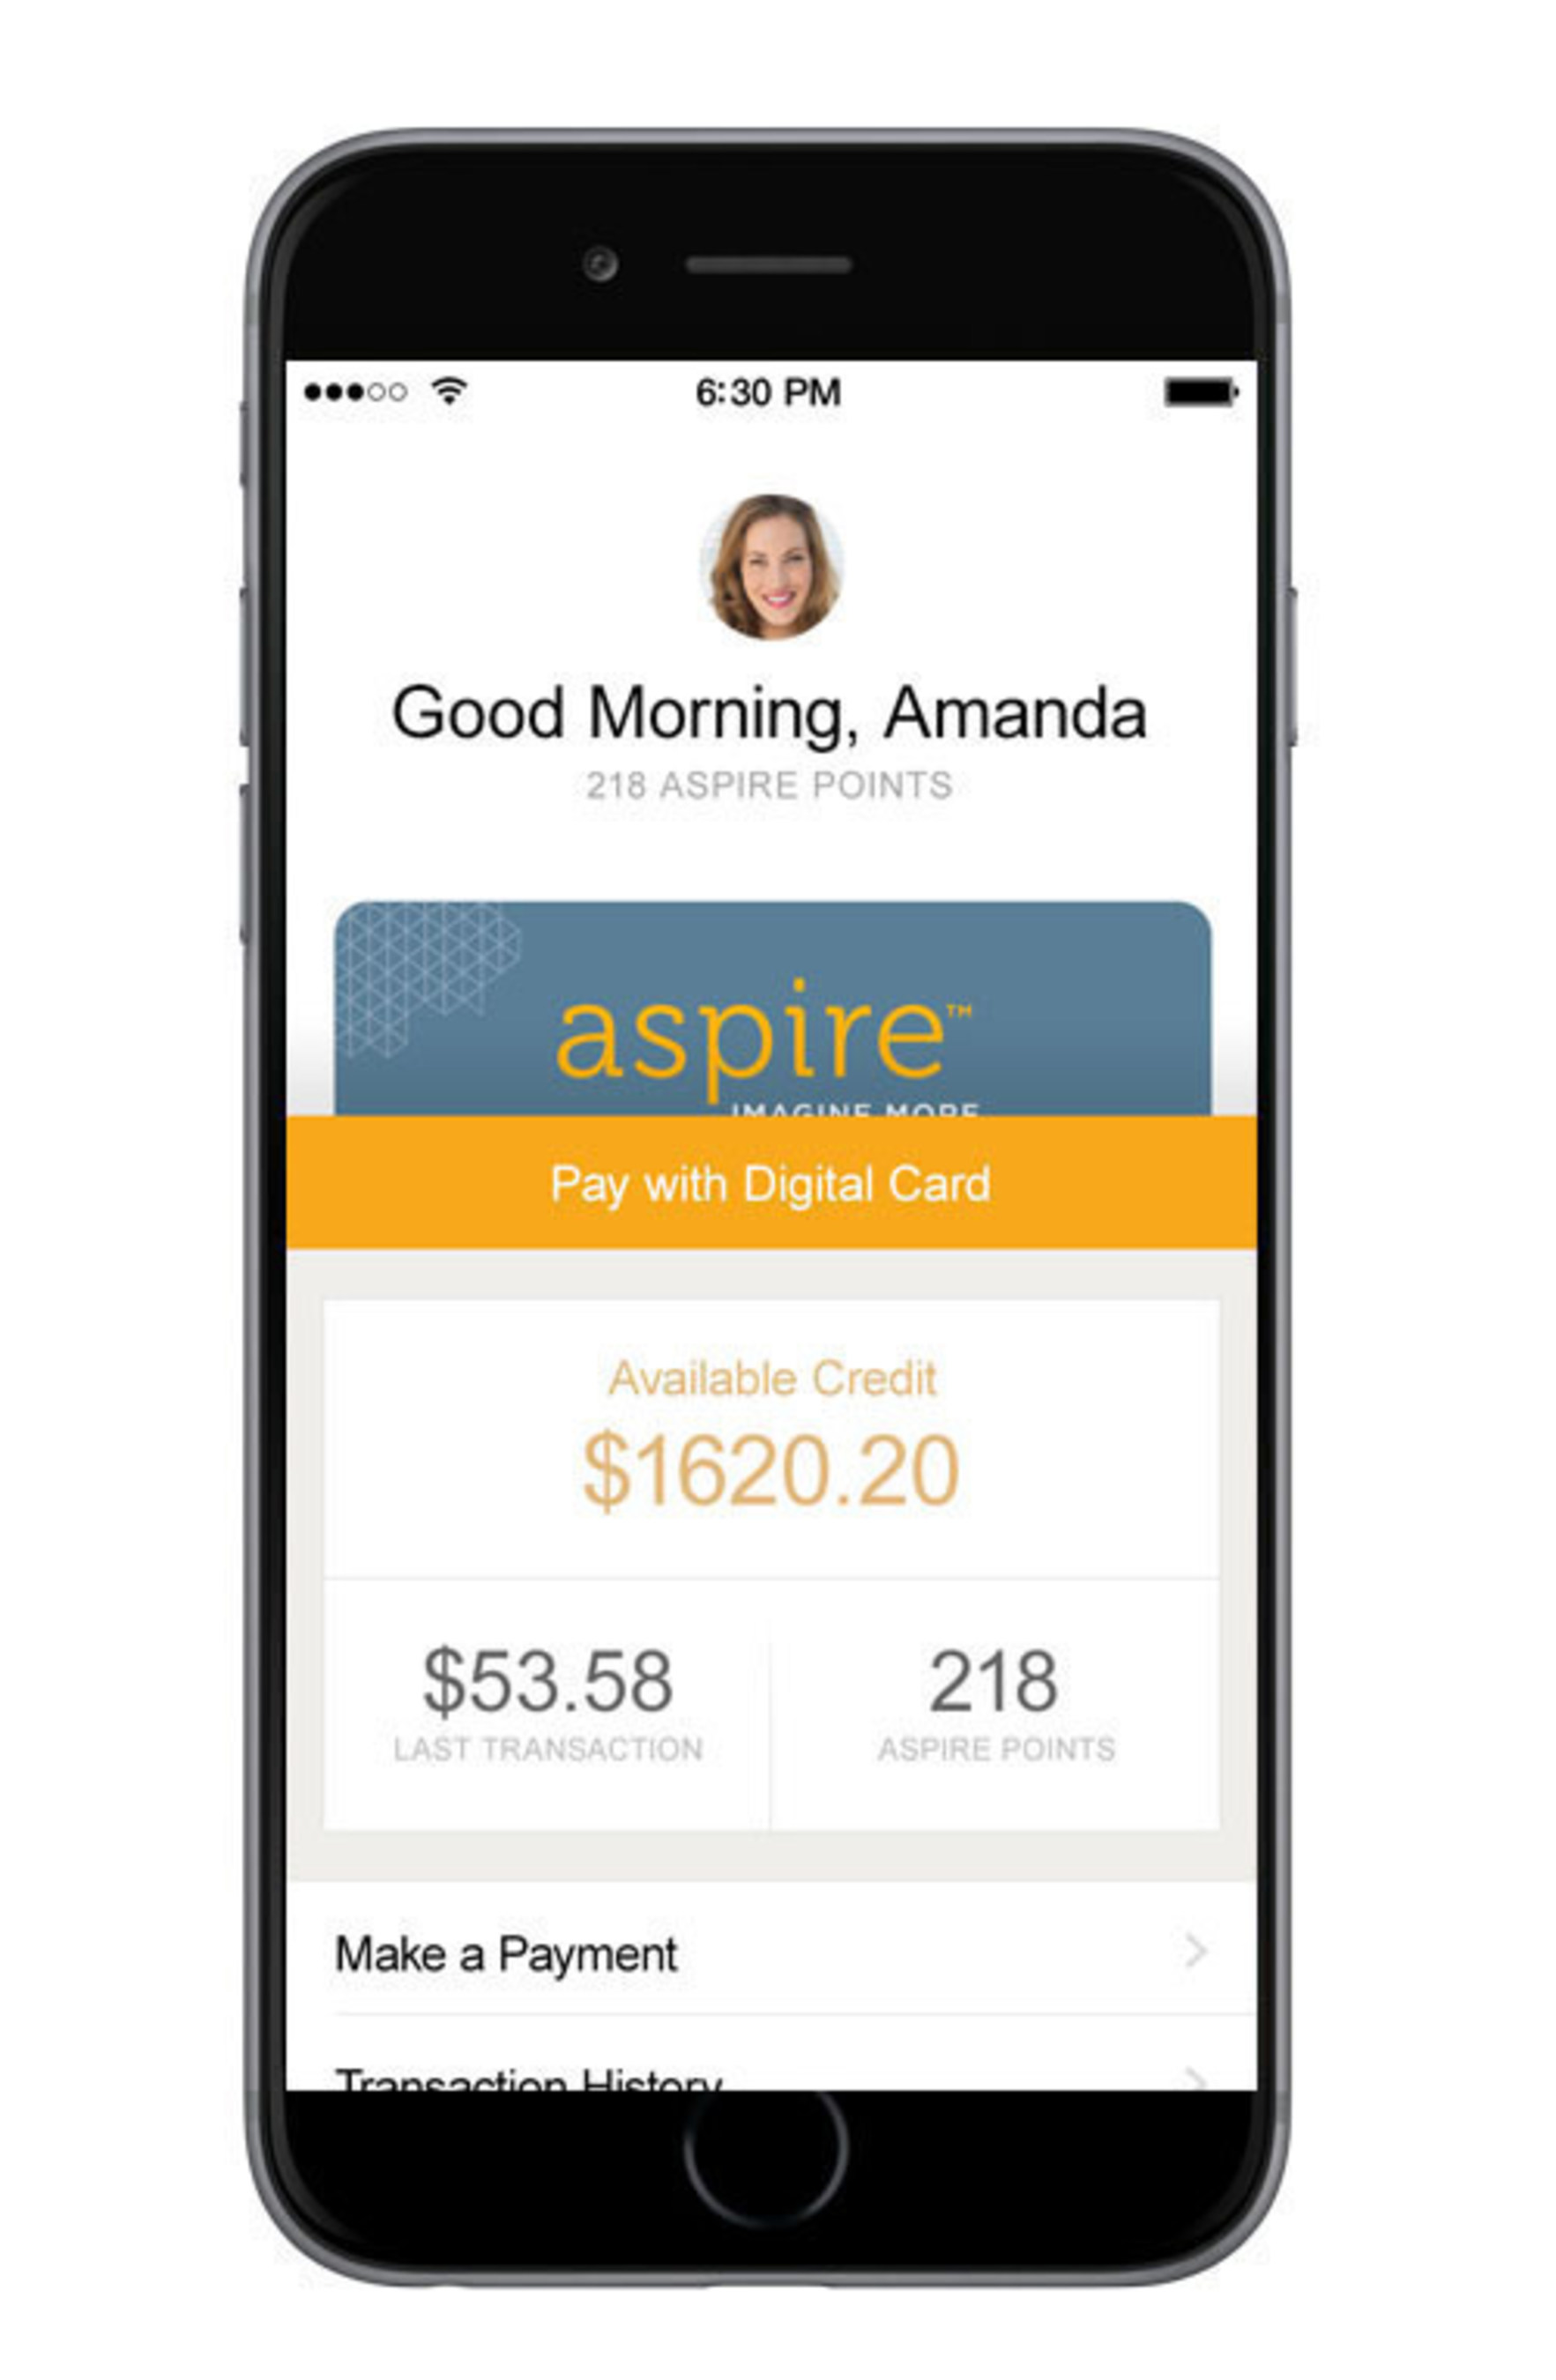 Alliance Data's MyLoyalty App is customized to each brand and provides customers with the ability to apply, shop, earn and connect with their favorite brands. Retailers and customers may choose from a variety of features including the ability to apply for a store-brand credit card, make purchases with the MyDigitalCard, and earn and redeem rewards at the point of sale.